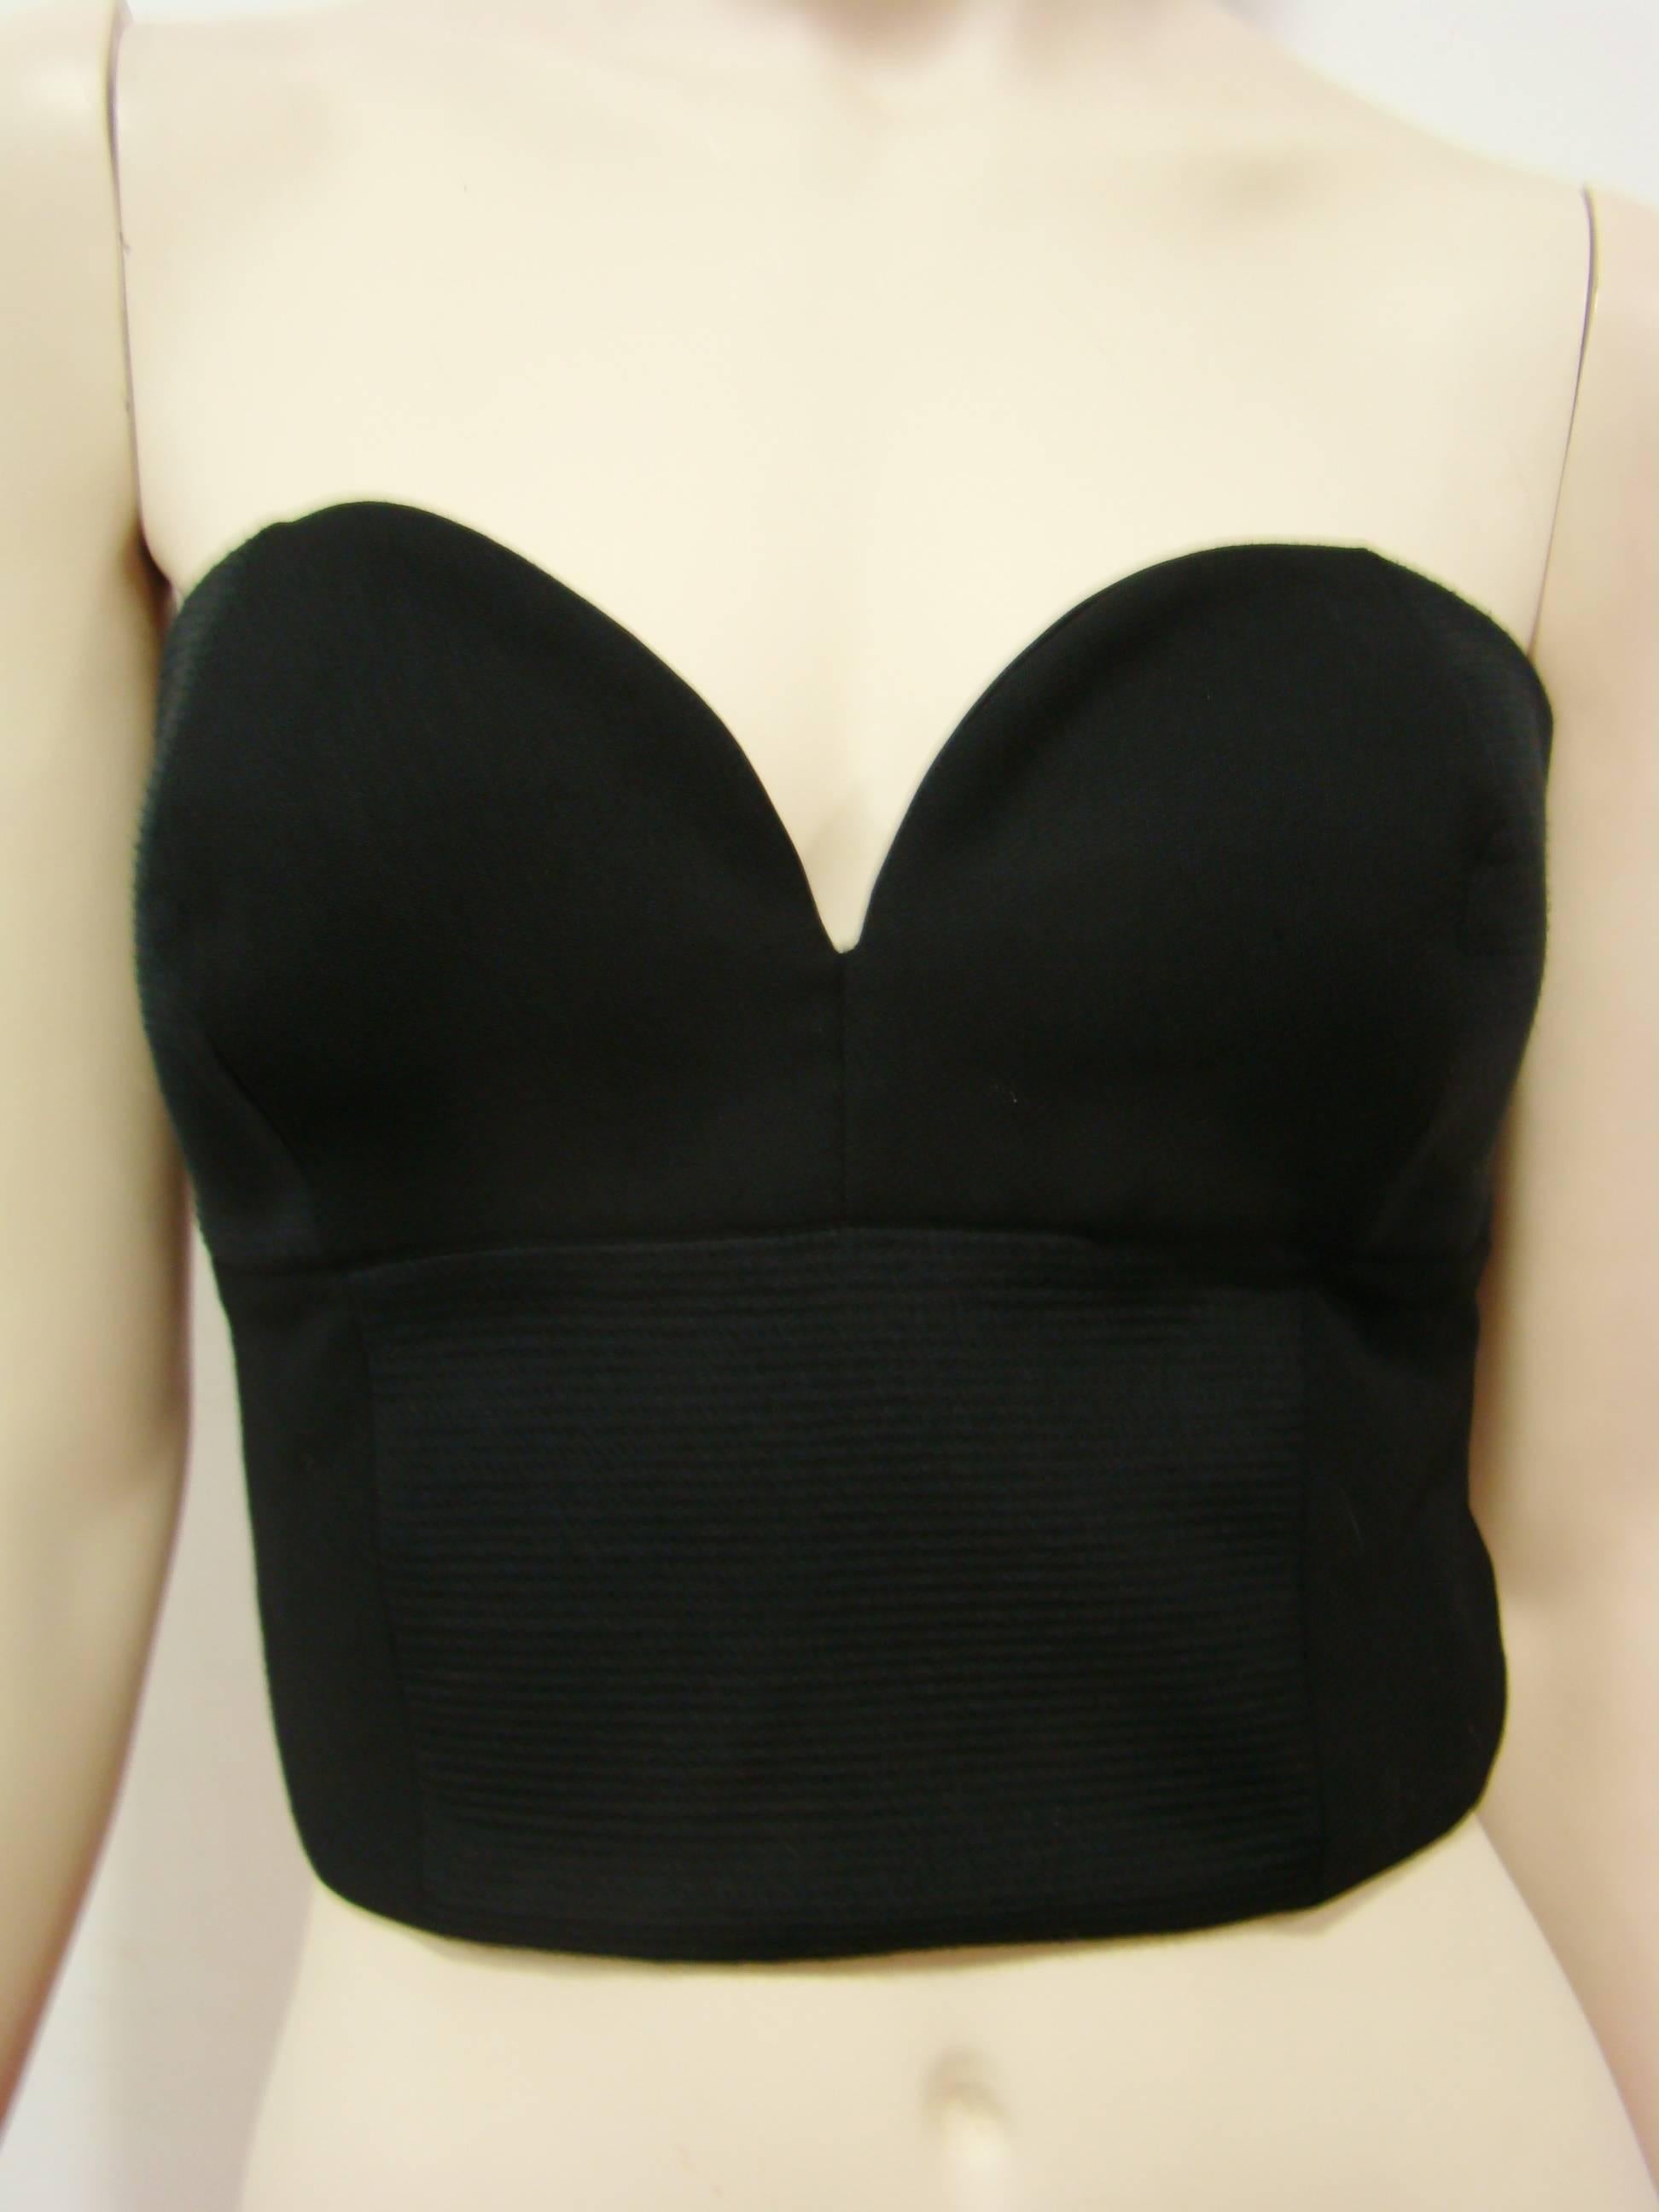 Gianni Versace Couture Black Wool Bustier Top Is An Elegant Choice For Evening Events. This Italian Crafted Piece Is Cut From The Combination Of Silk And Virgin Wool, Featuring Spagheti Straps, A Sweetheart Neckline, Concealed Hook Closure and